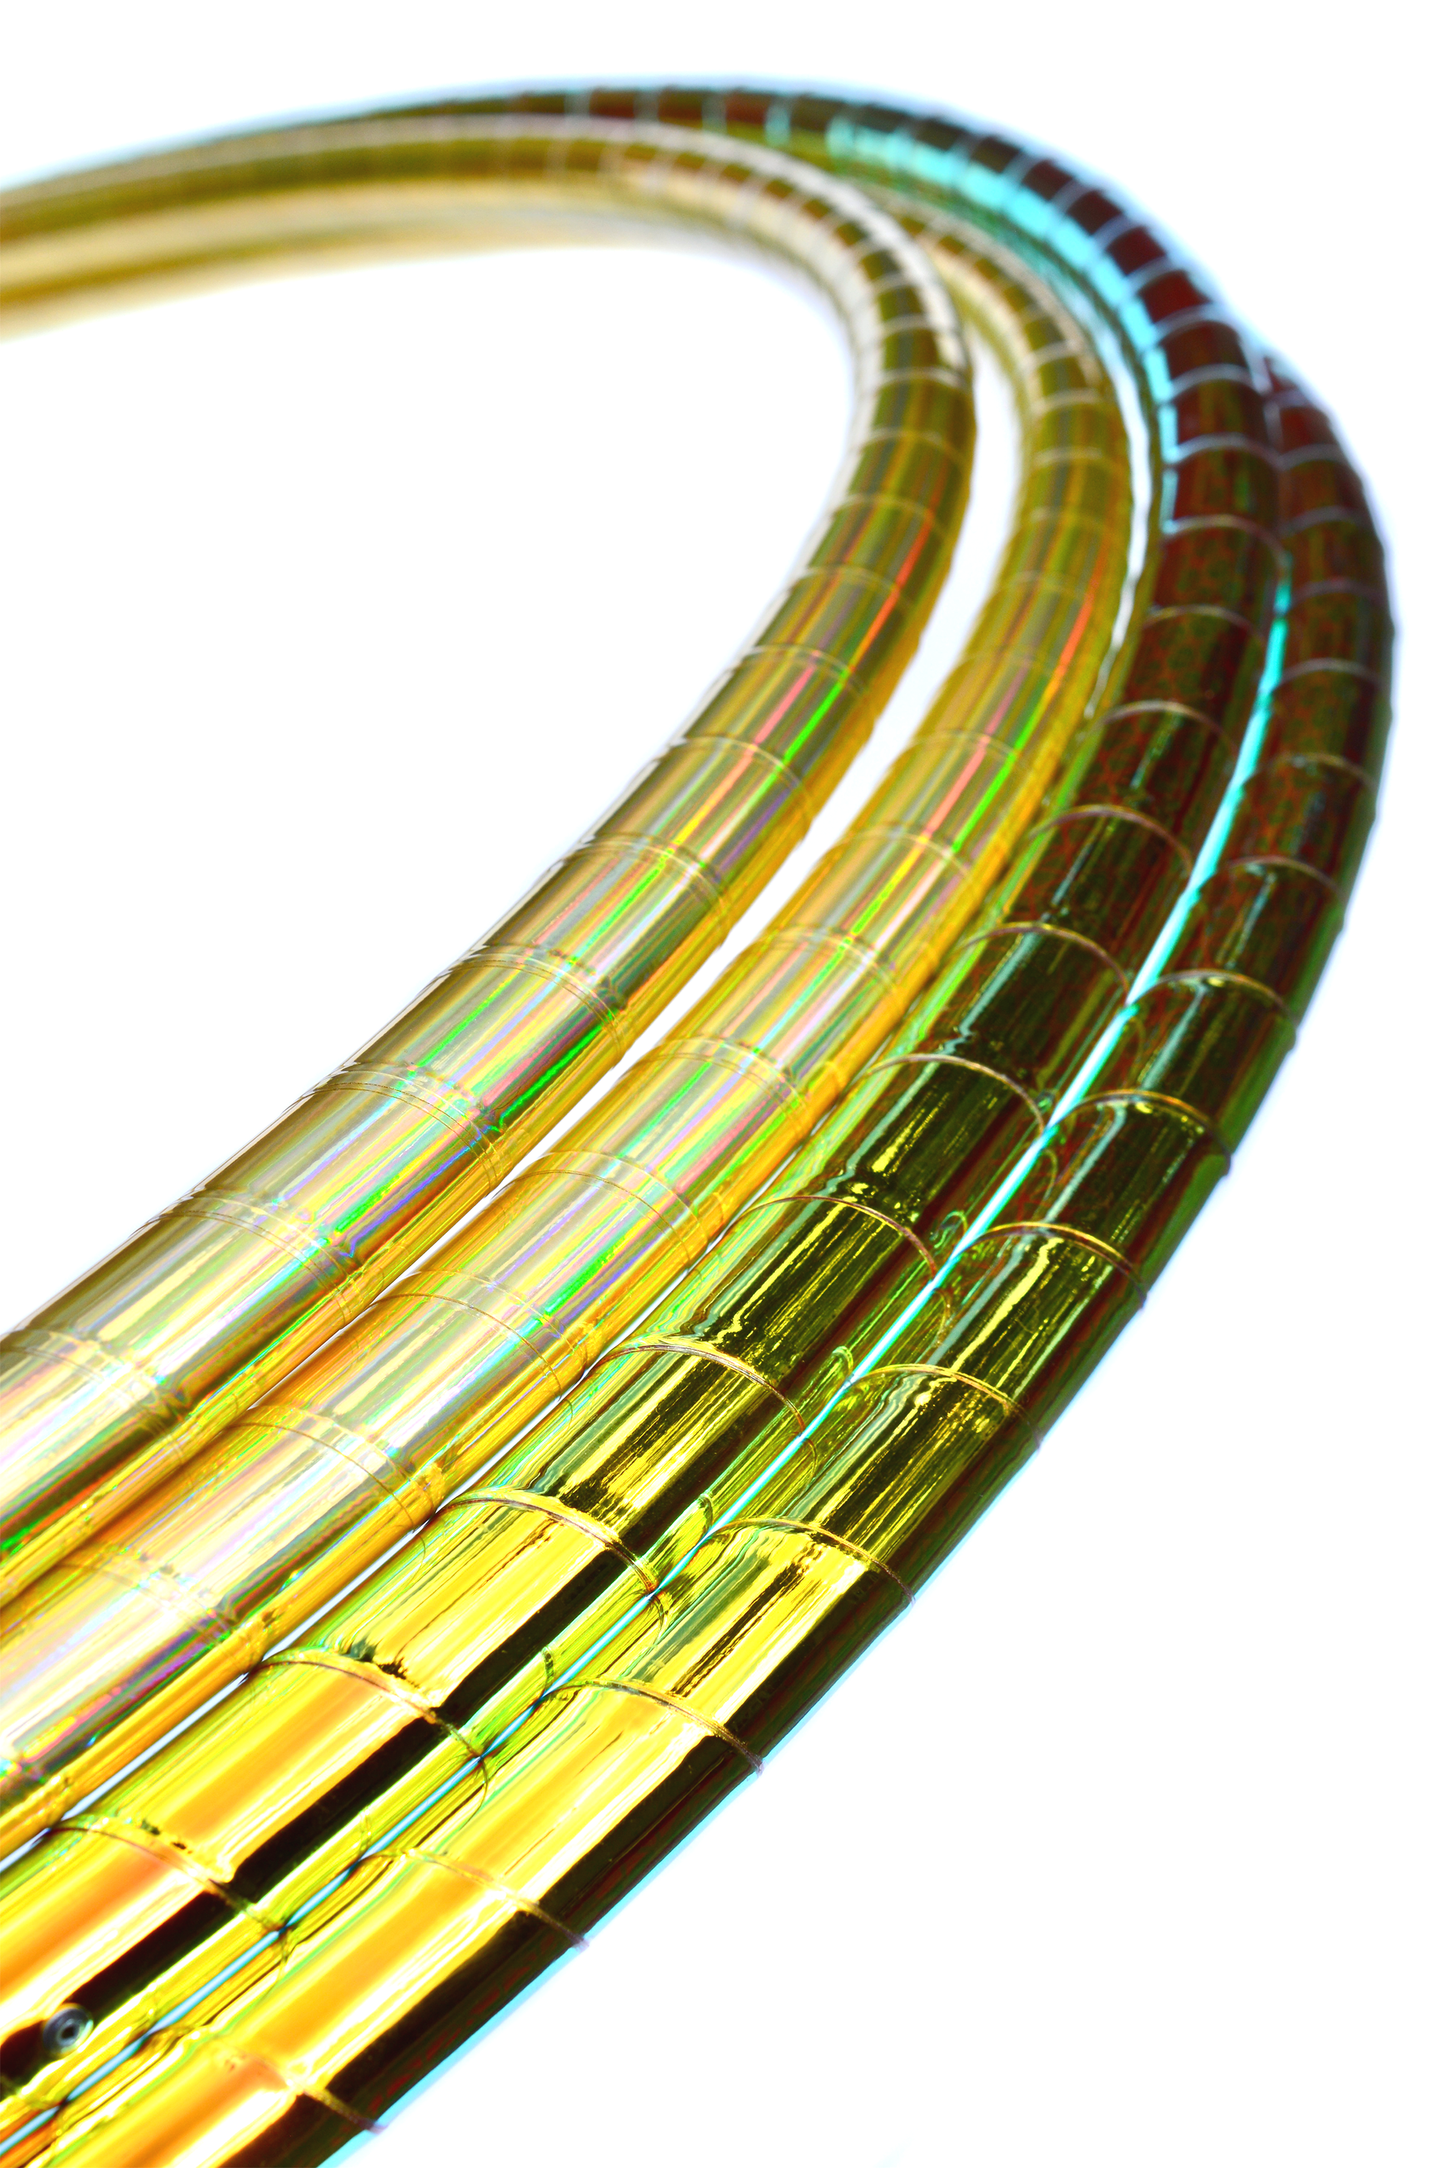 Holographic Performance Taped Hoops